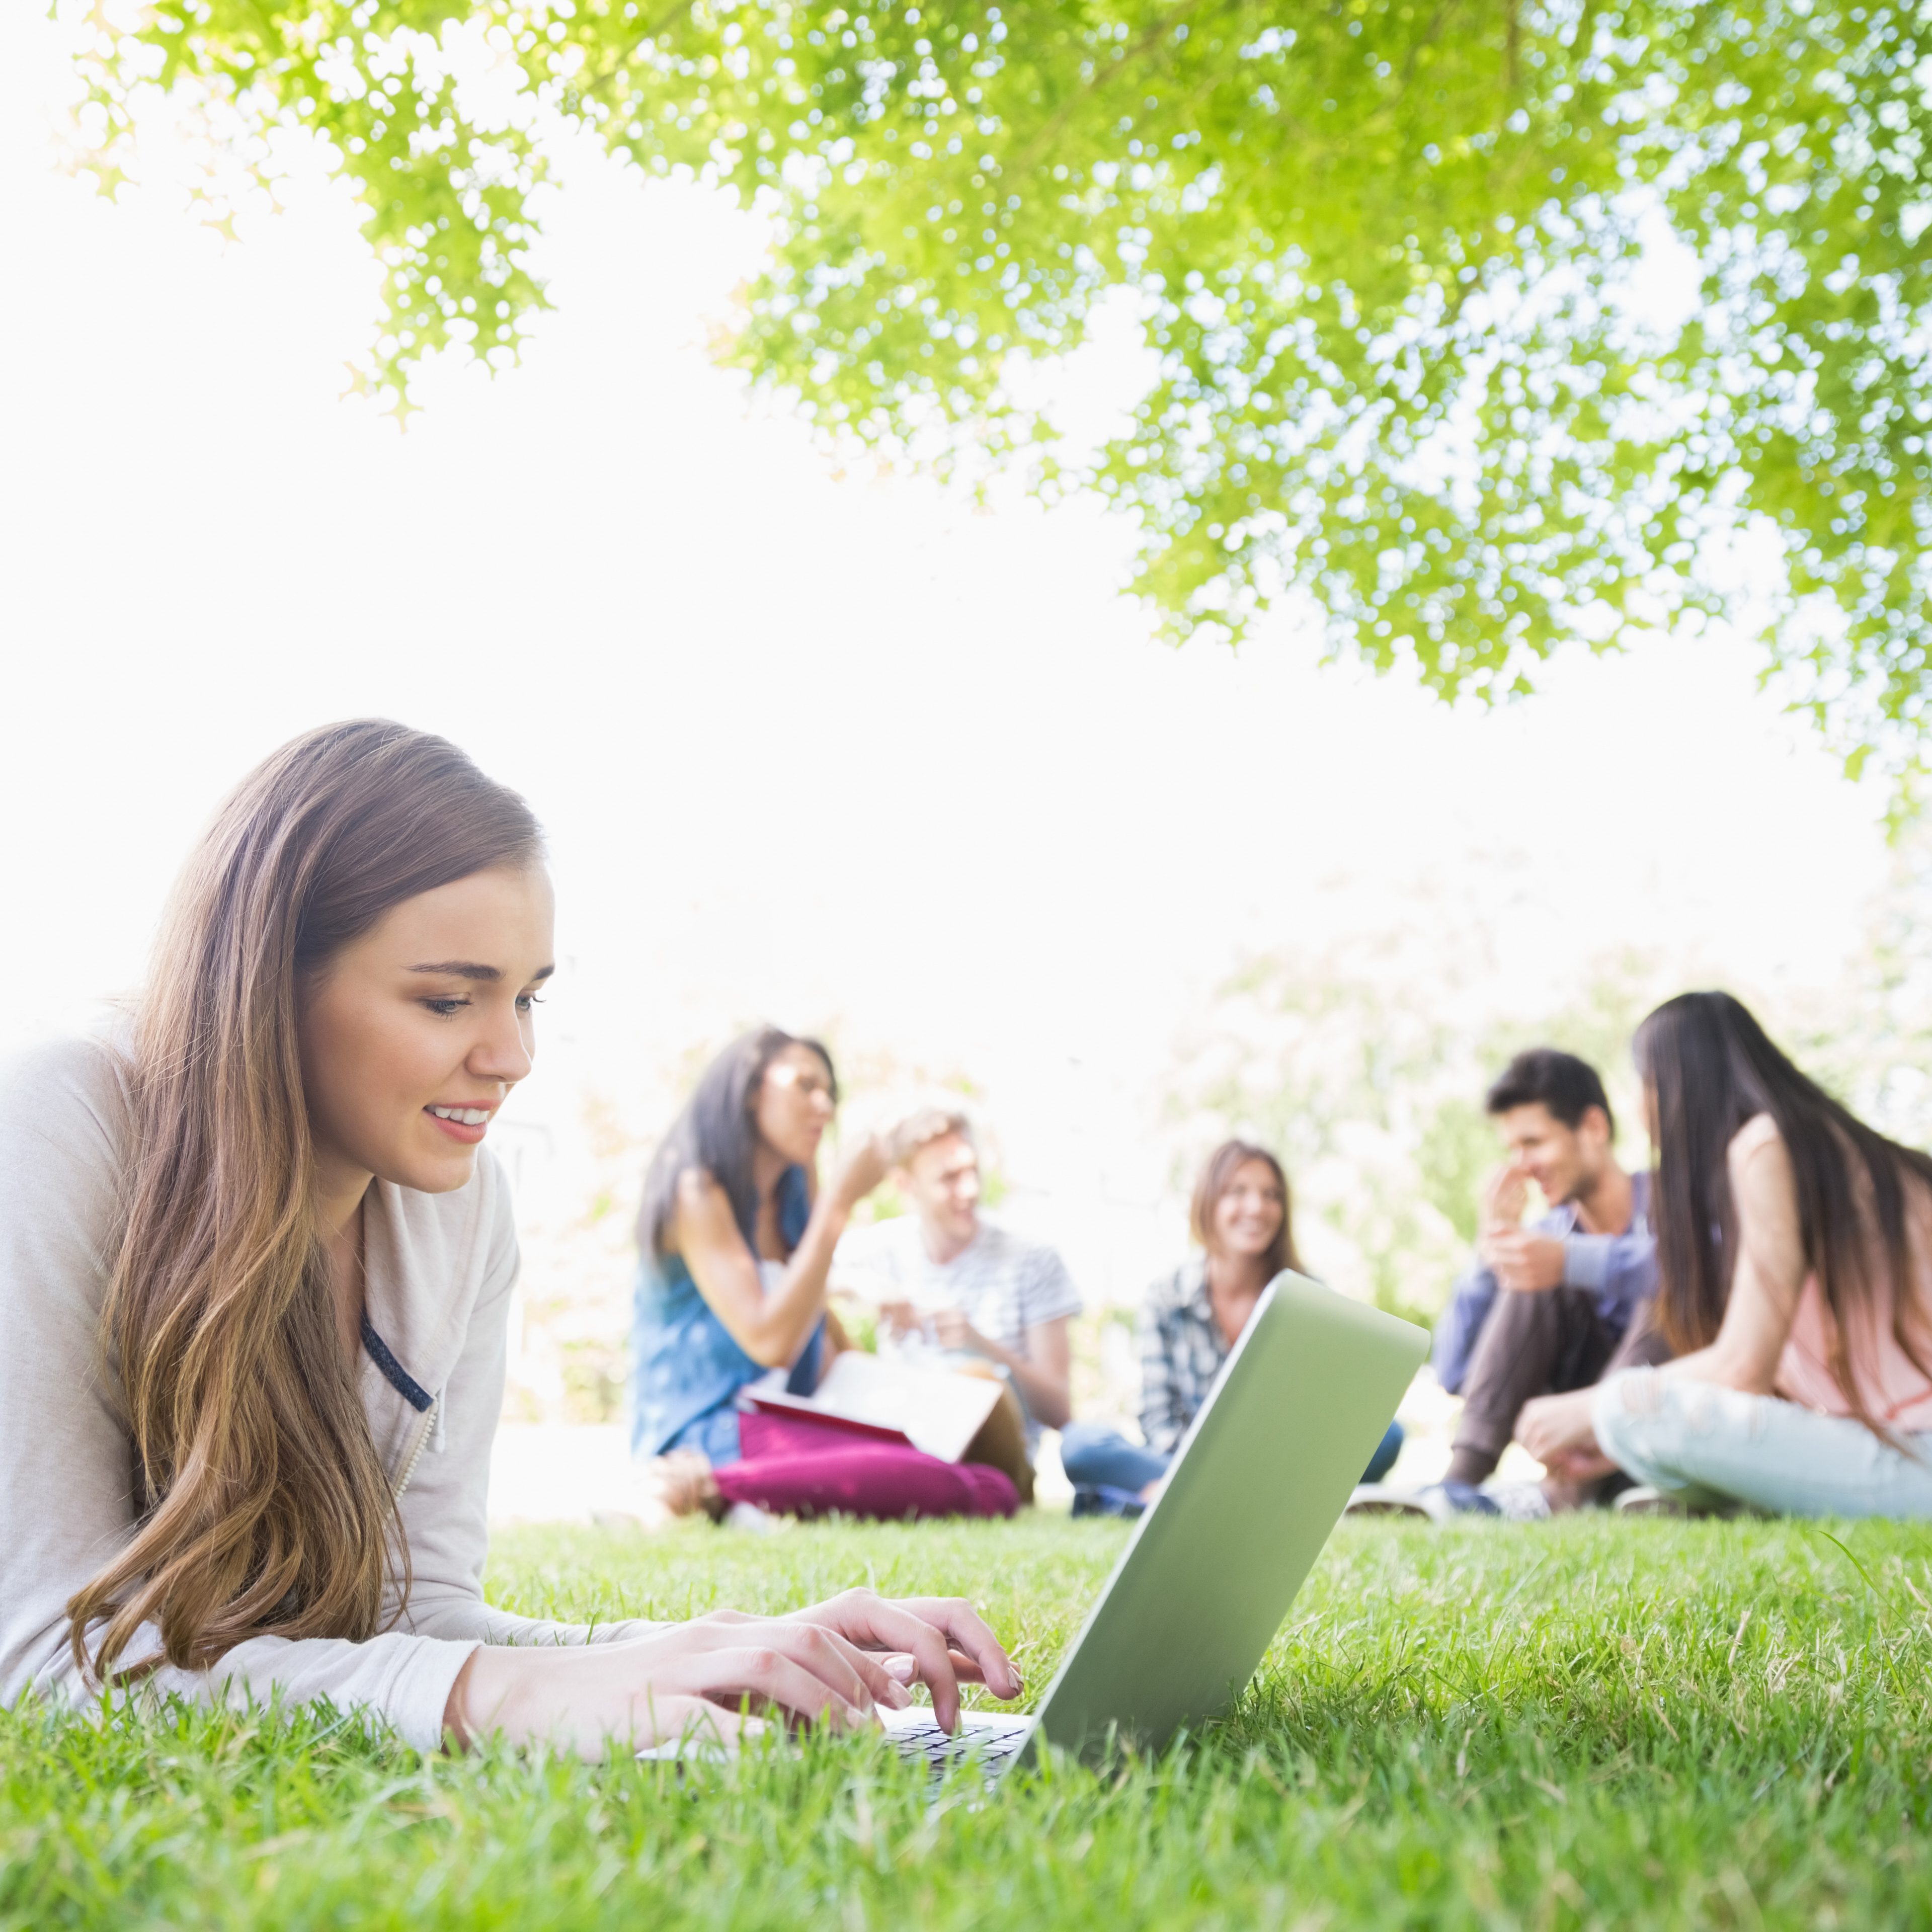 Using CDPs in higher education helps schools engage and attract students like these, sitting on a grassy lawn happily doing schoolwork